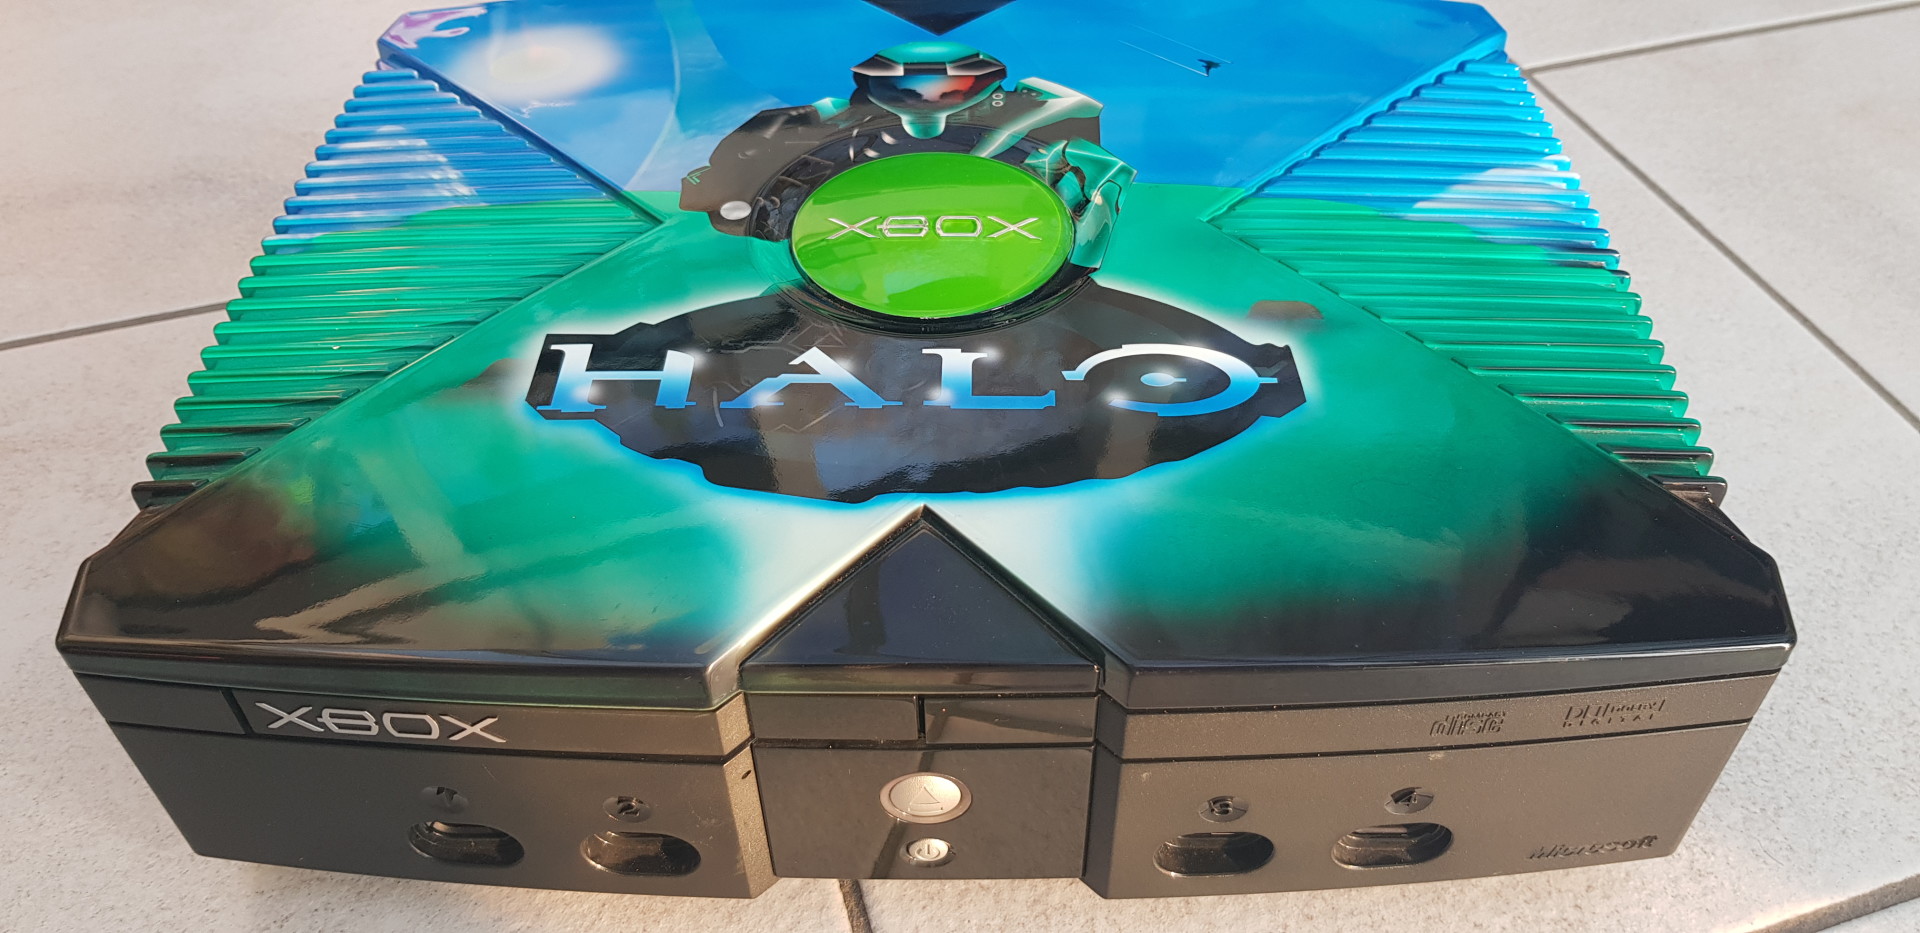 Limited Edition Halo: Combat Evolved Xbox, Xbox Wiki